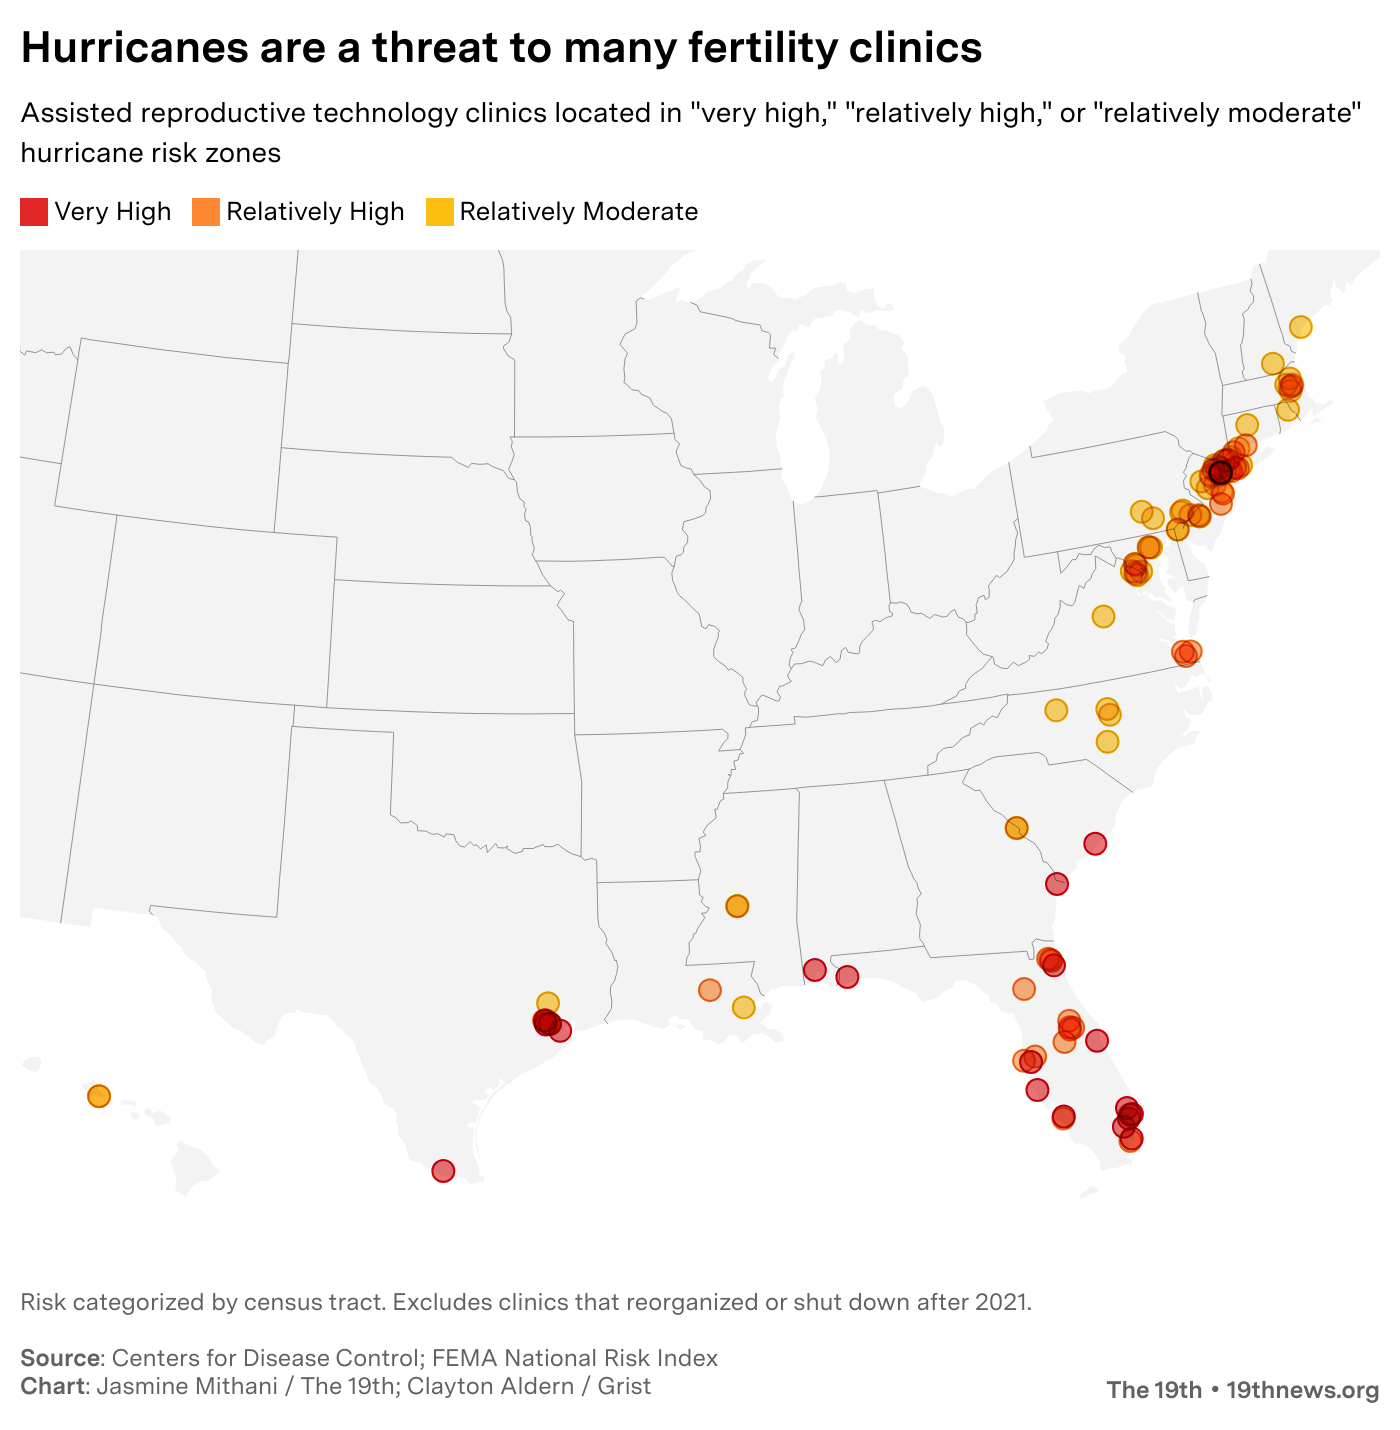 Map showing assisted reproductive technology clinics located in "very high," "relatively high," or "relatively moderate" hurricane risk zones.